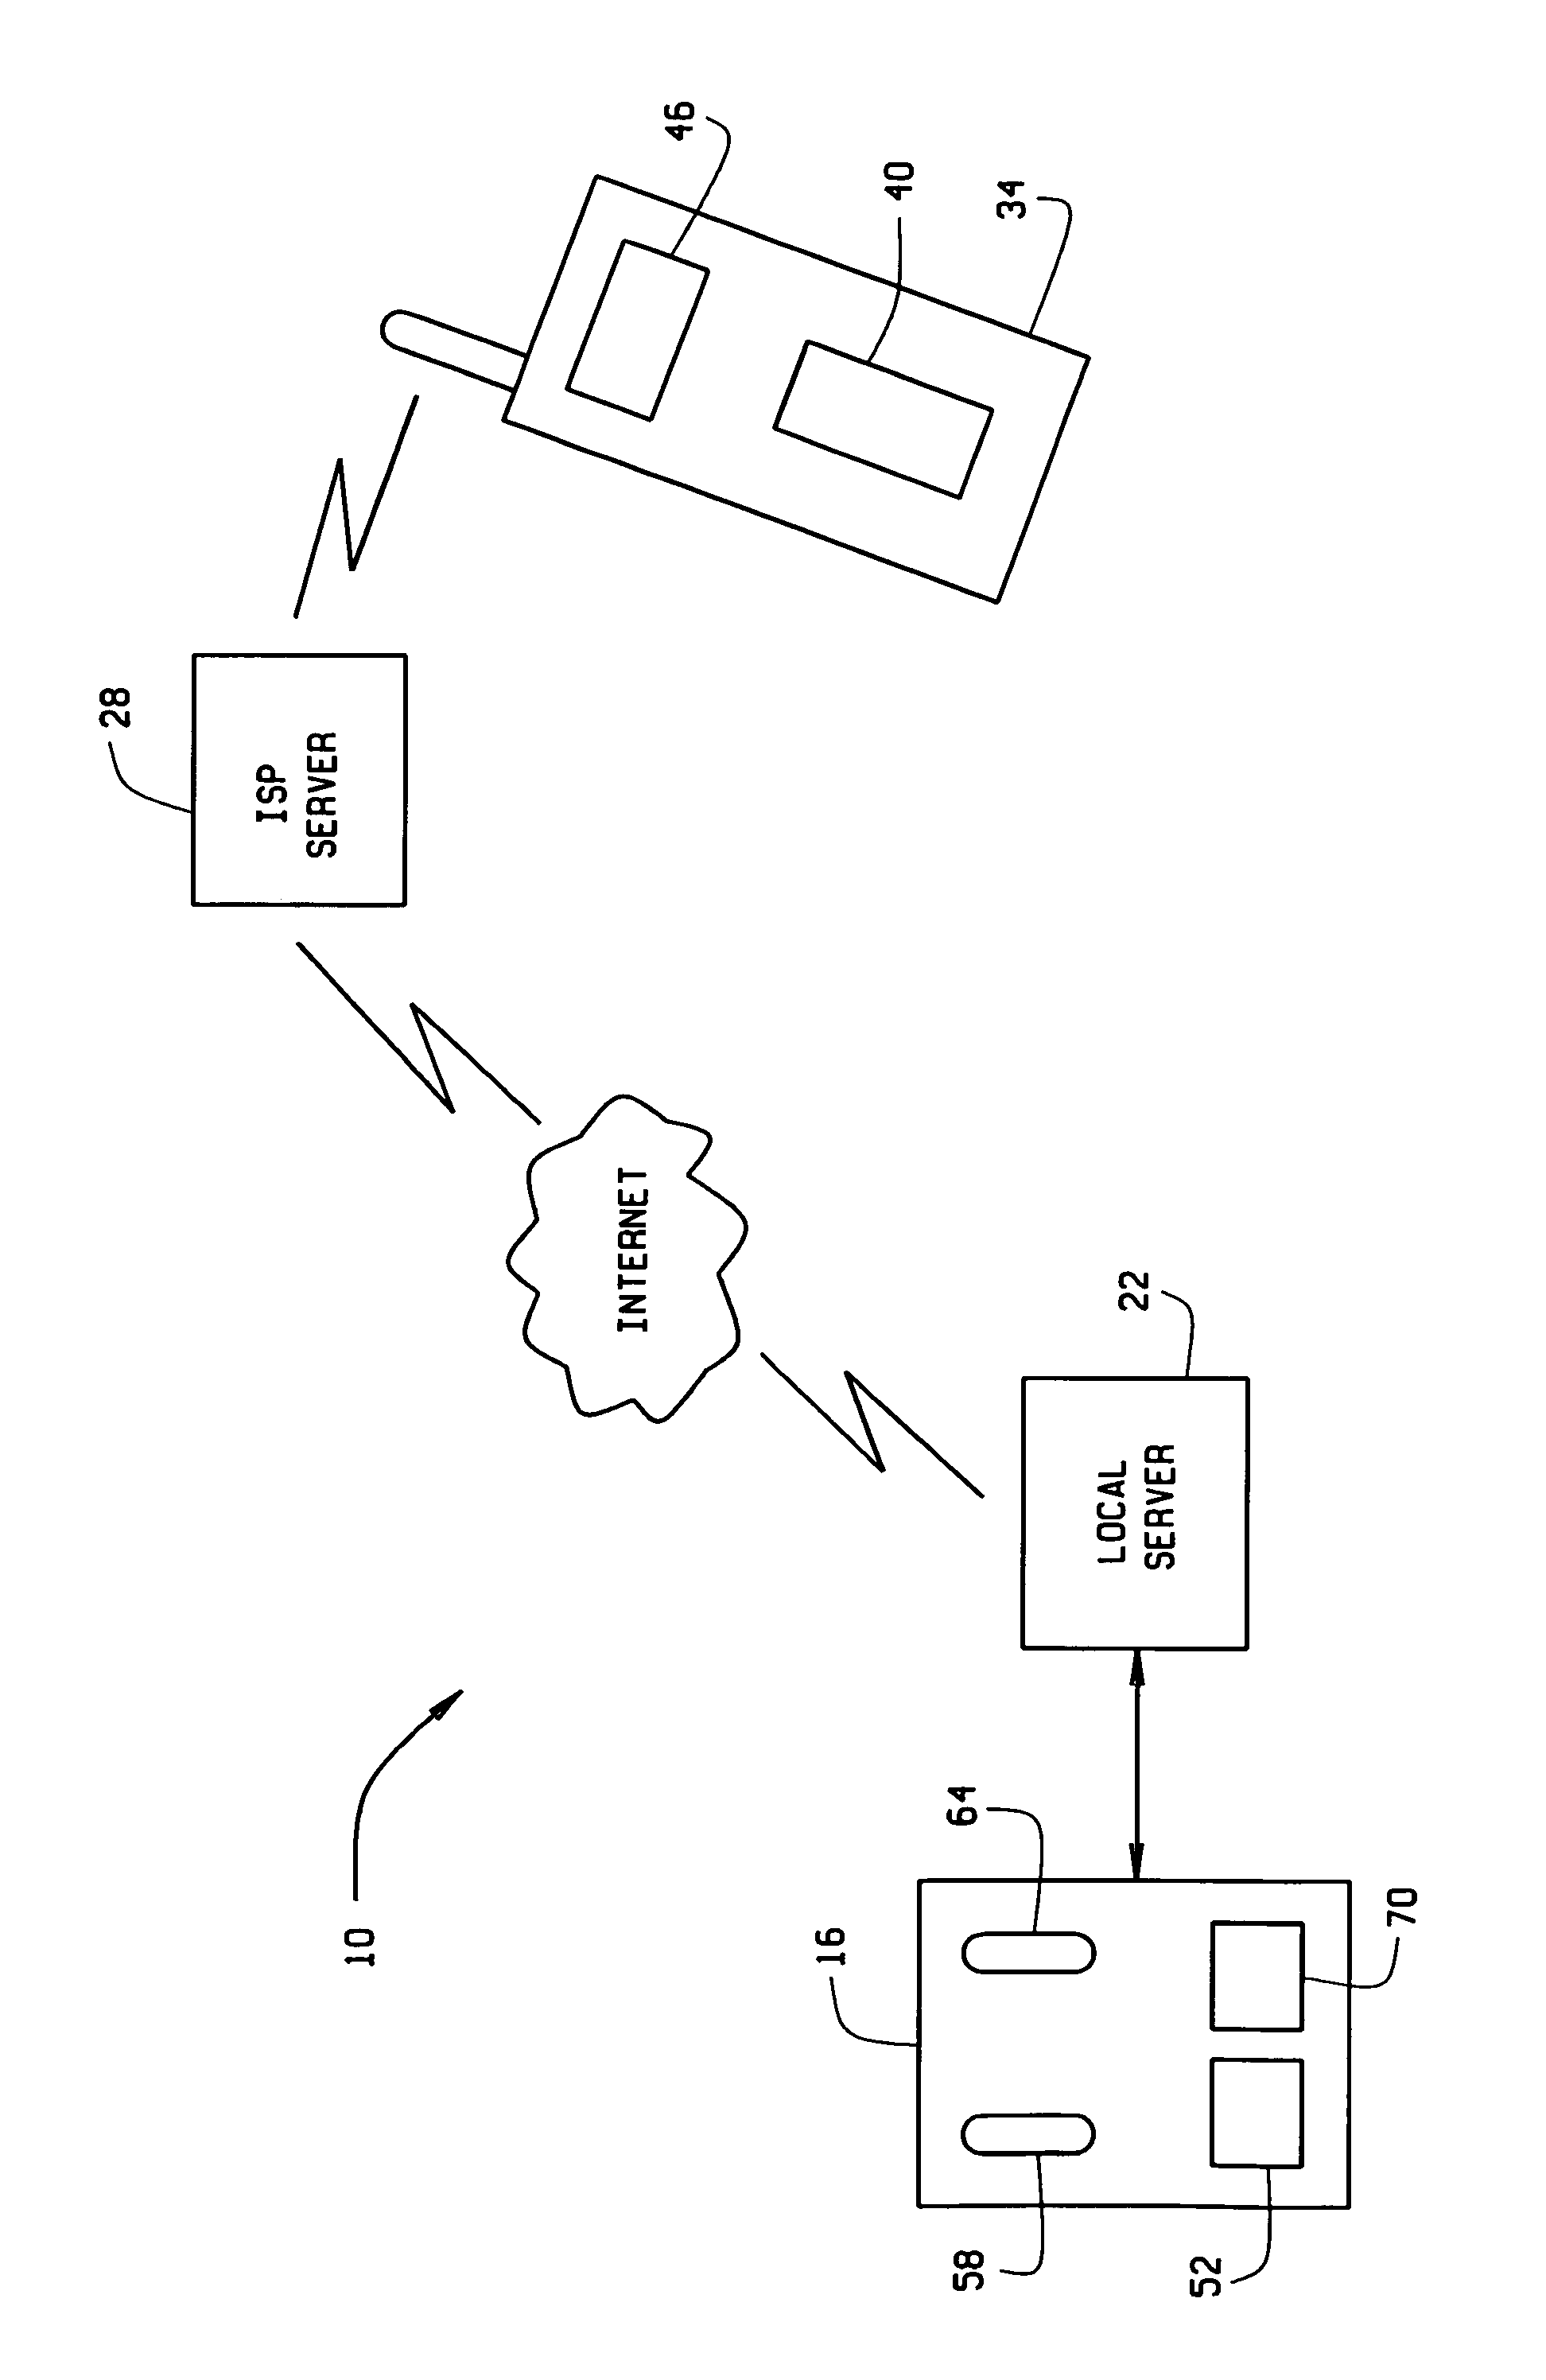 Method for using portable wireless devices to monitor industrial controllers